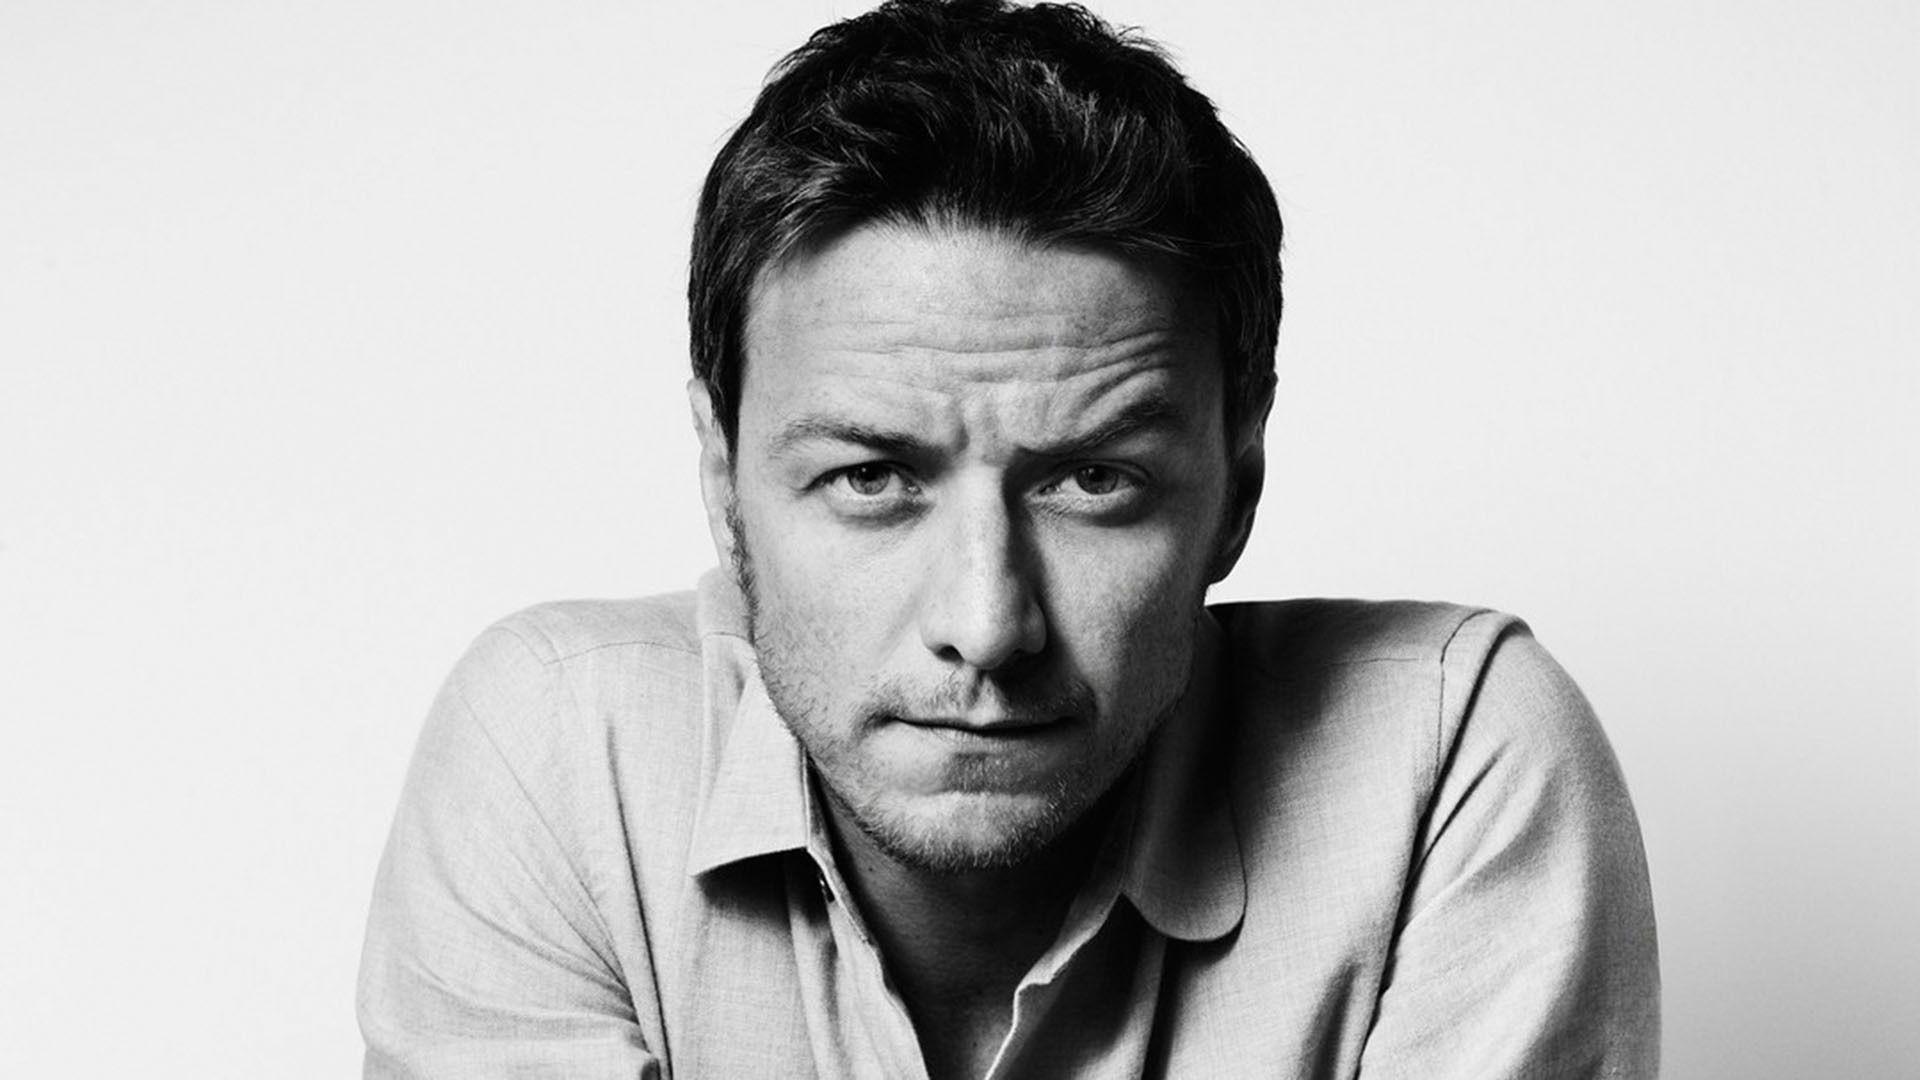 James McAvoy Wallpaper Image Photo Picture Background